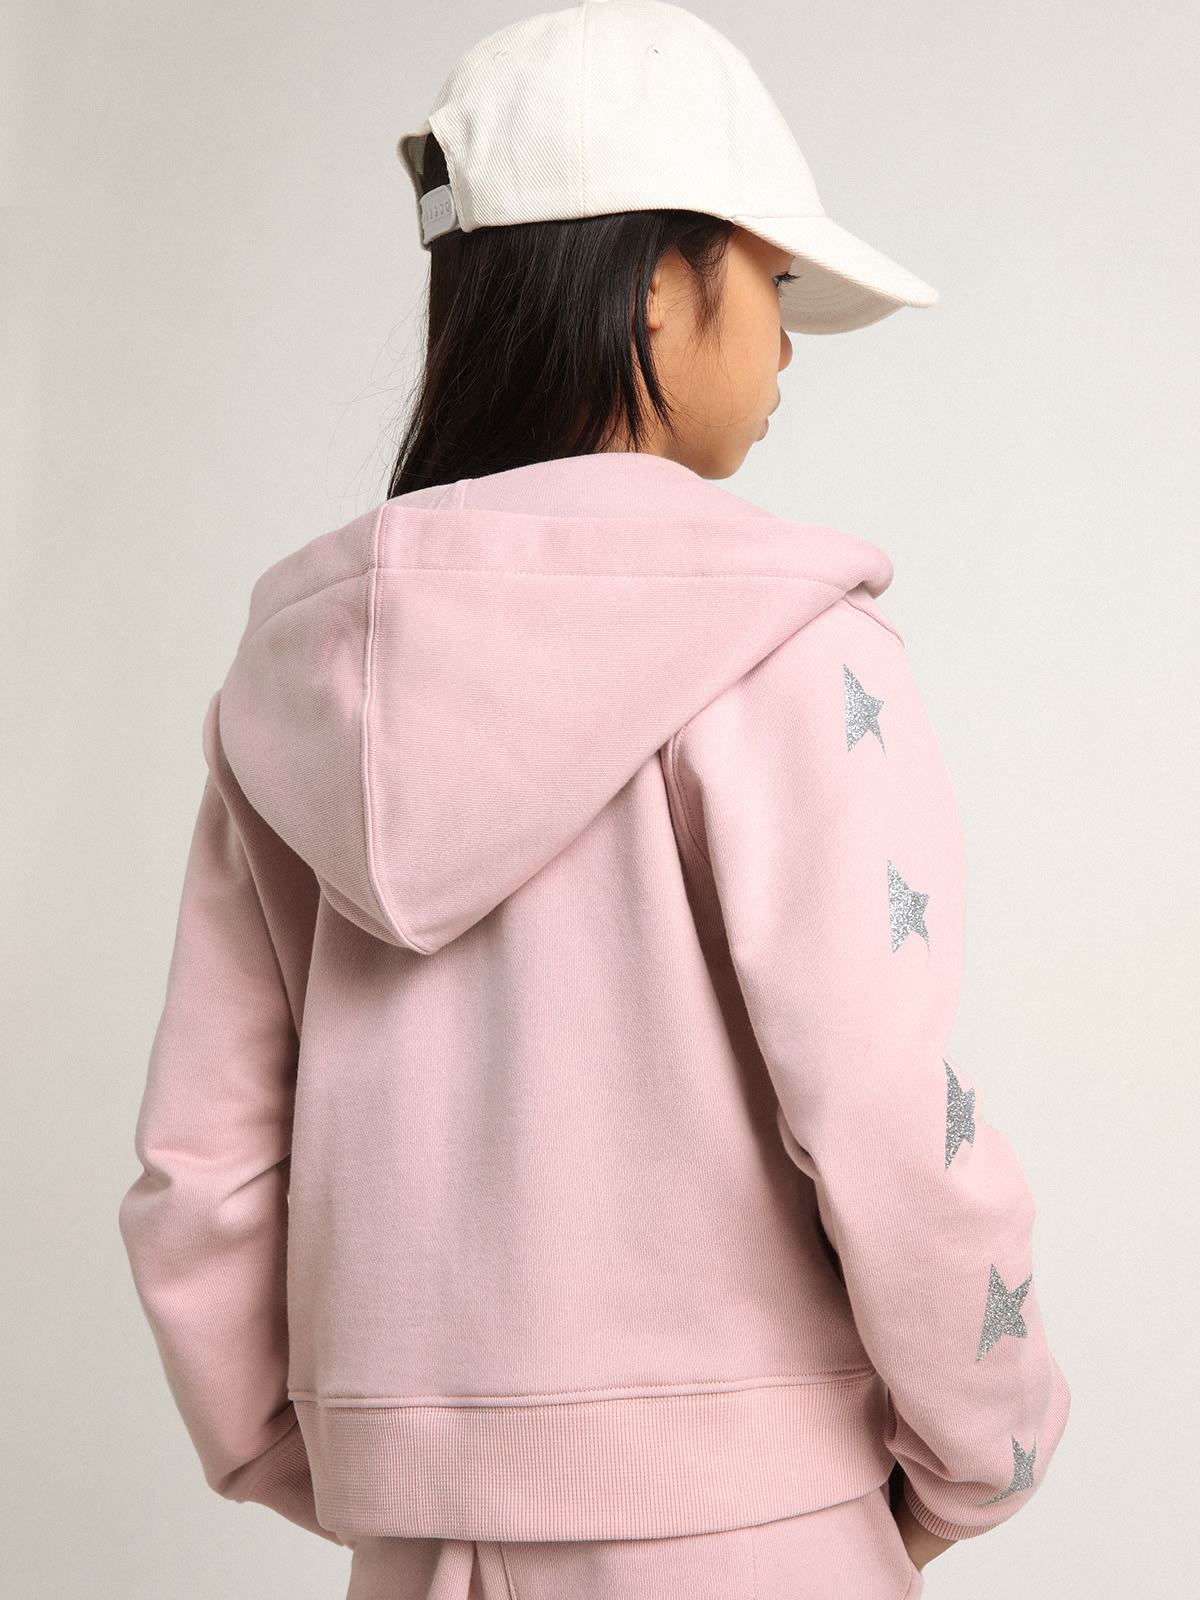 Golden Goose - Pink Star Collection hooded sweatshirt with contrasting silver glitter stars in 